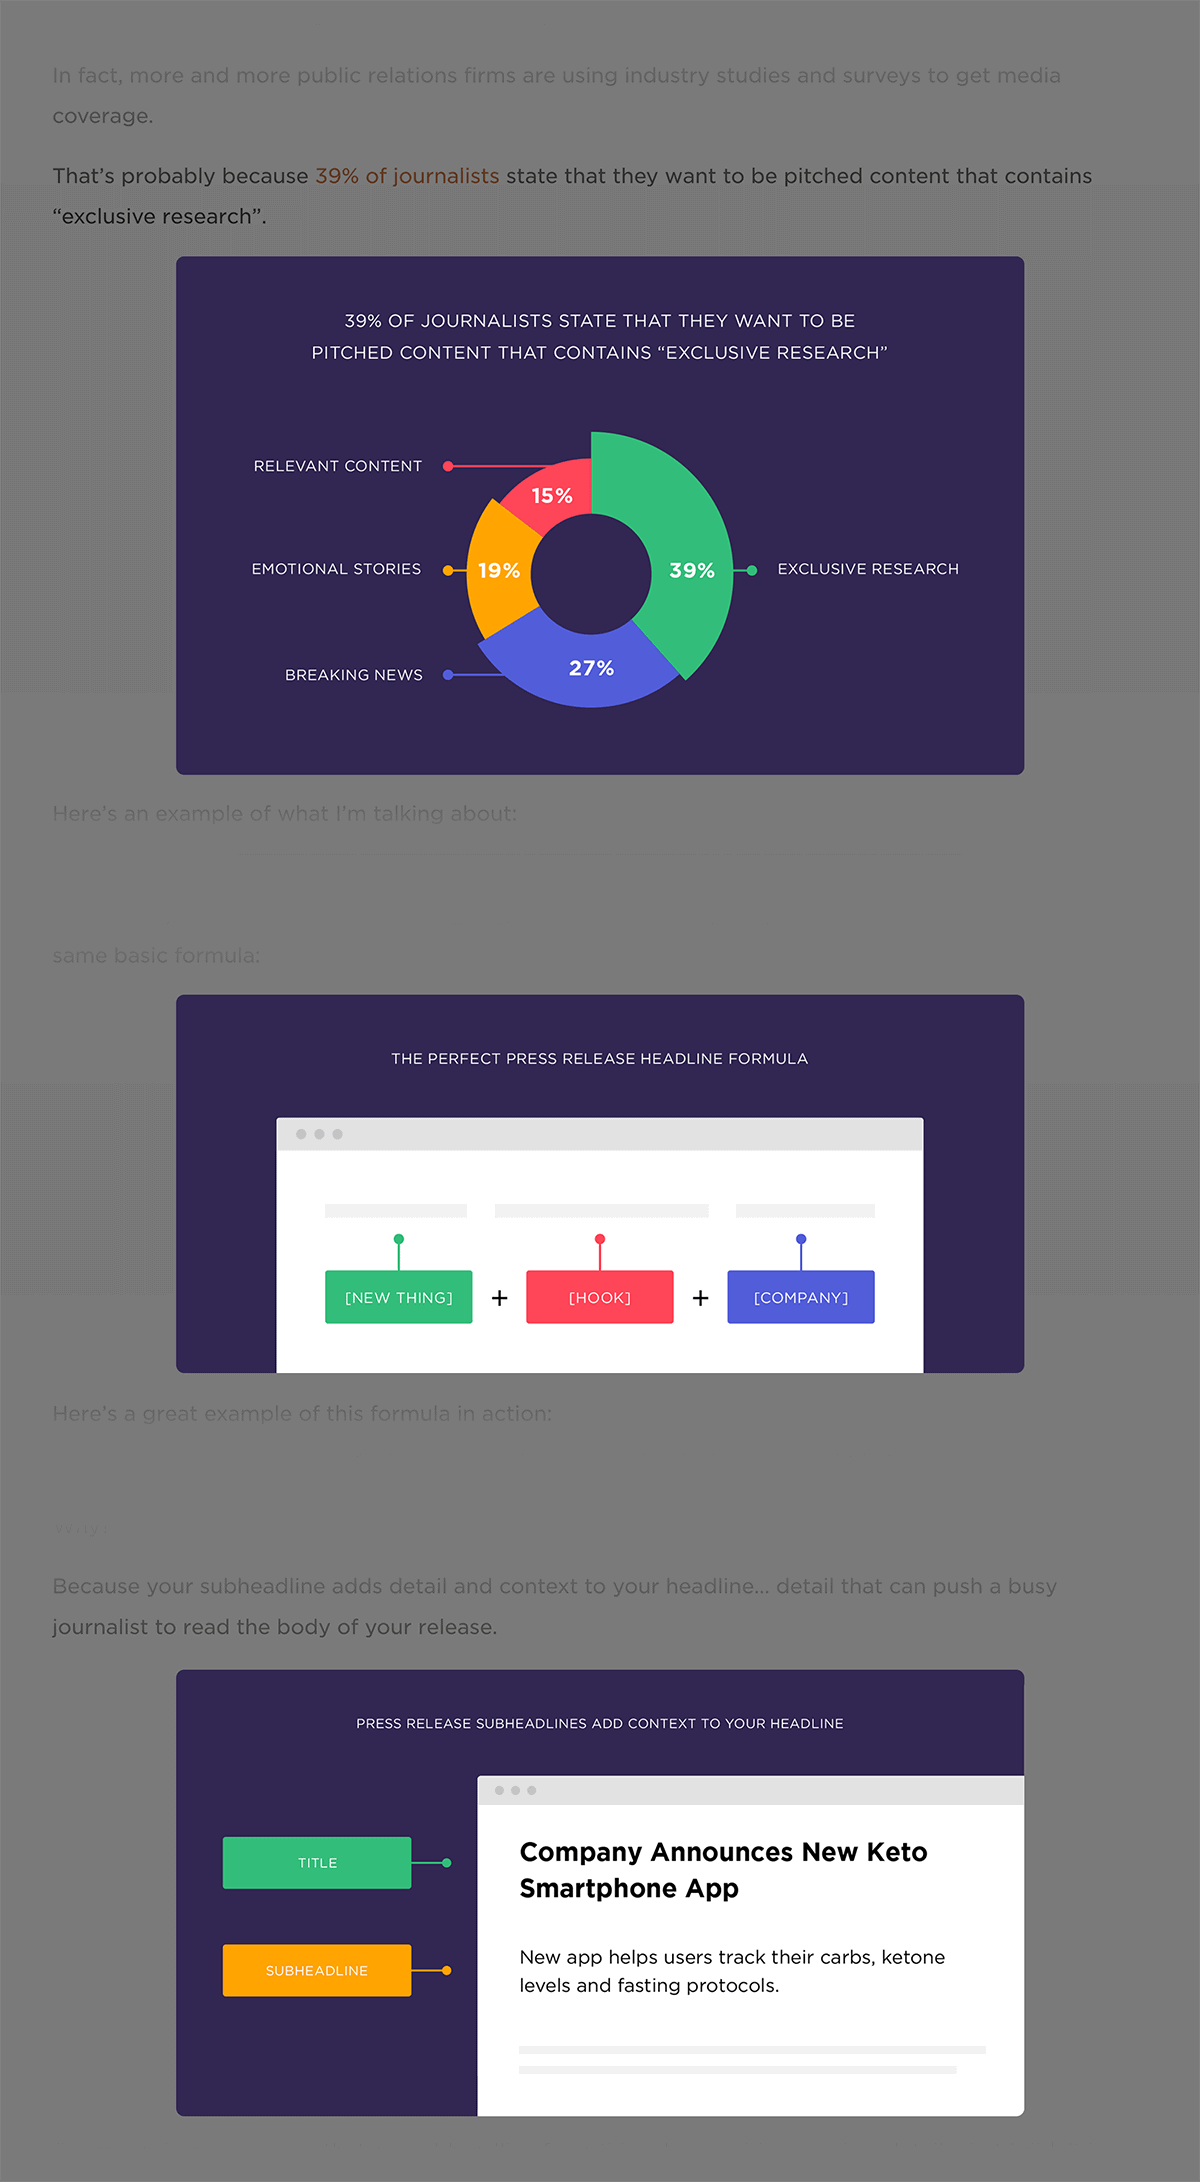 Visuals and charts in every post